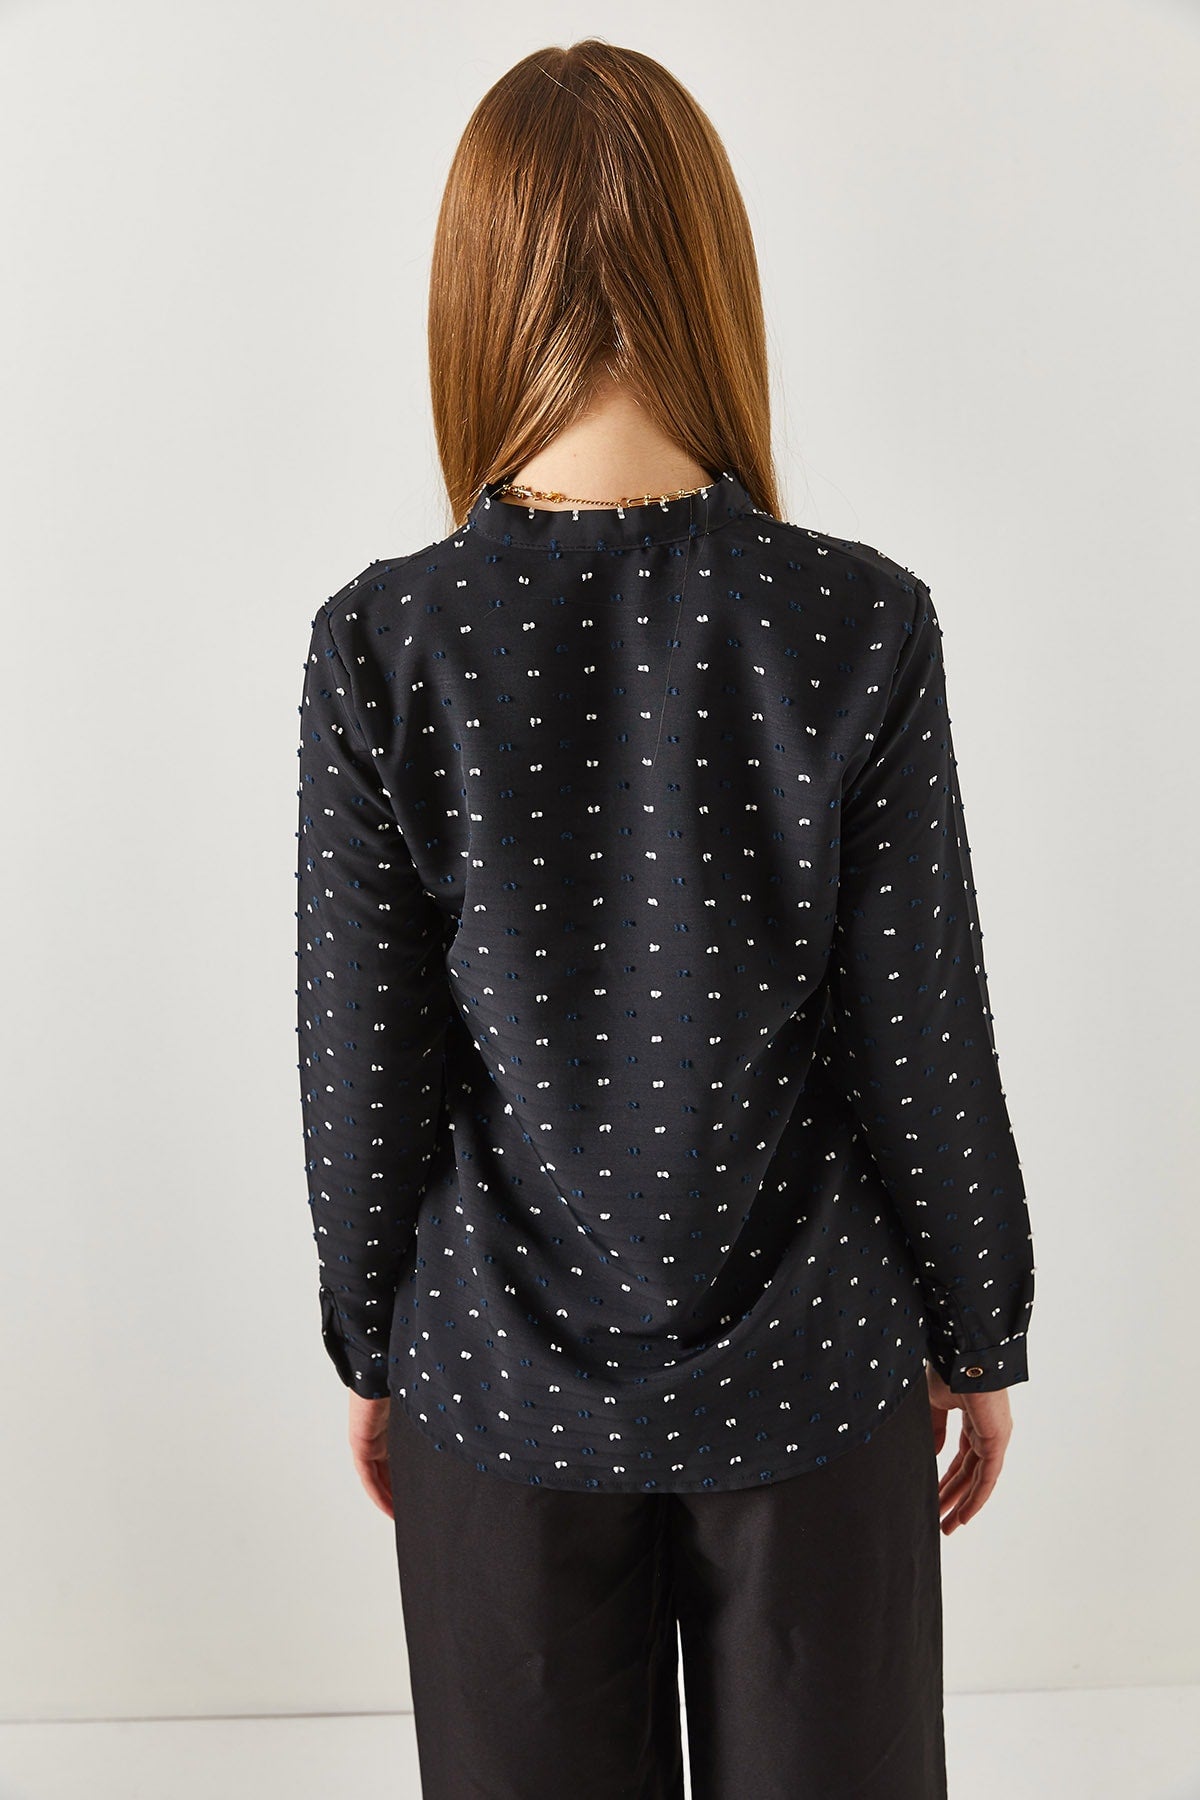 Female black collar connected patterned shirt ARM-221183